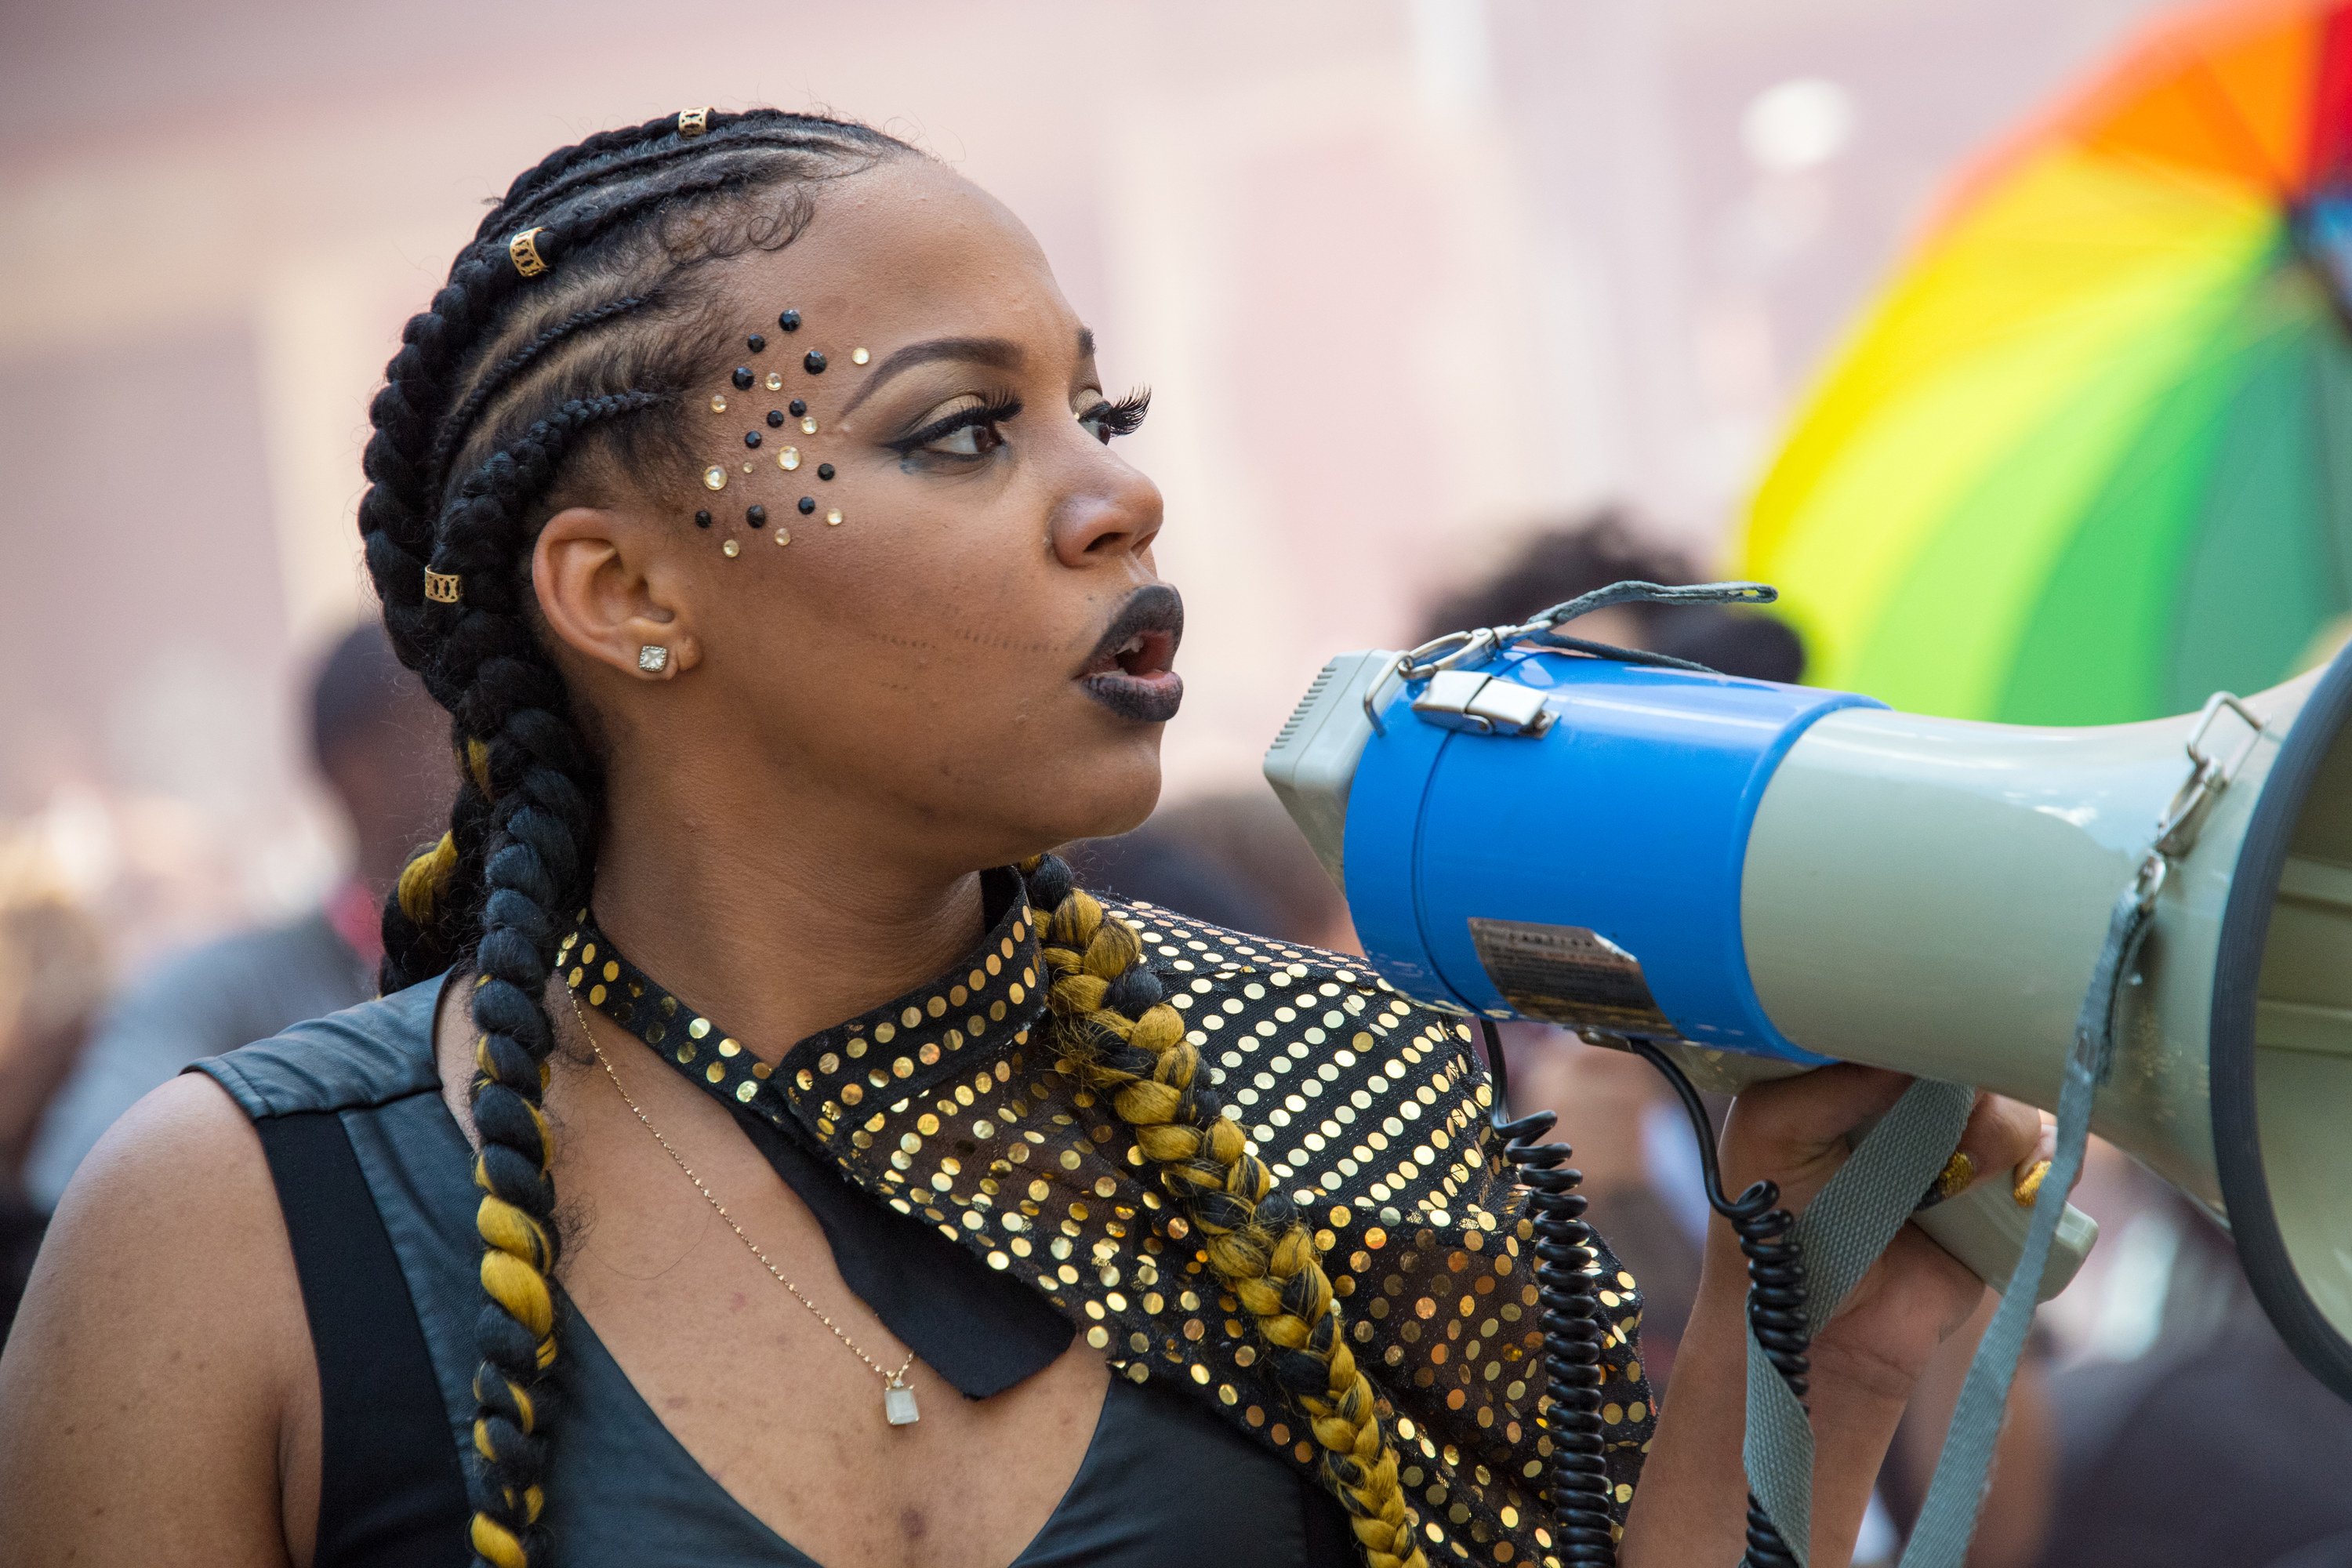 A member of Black Lives Matter holding a megaphone at the Pride Parade